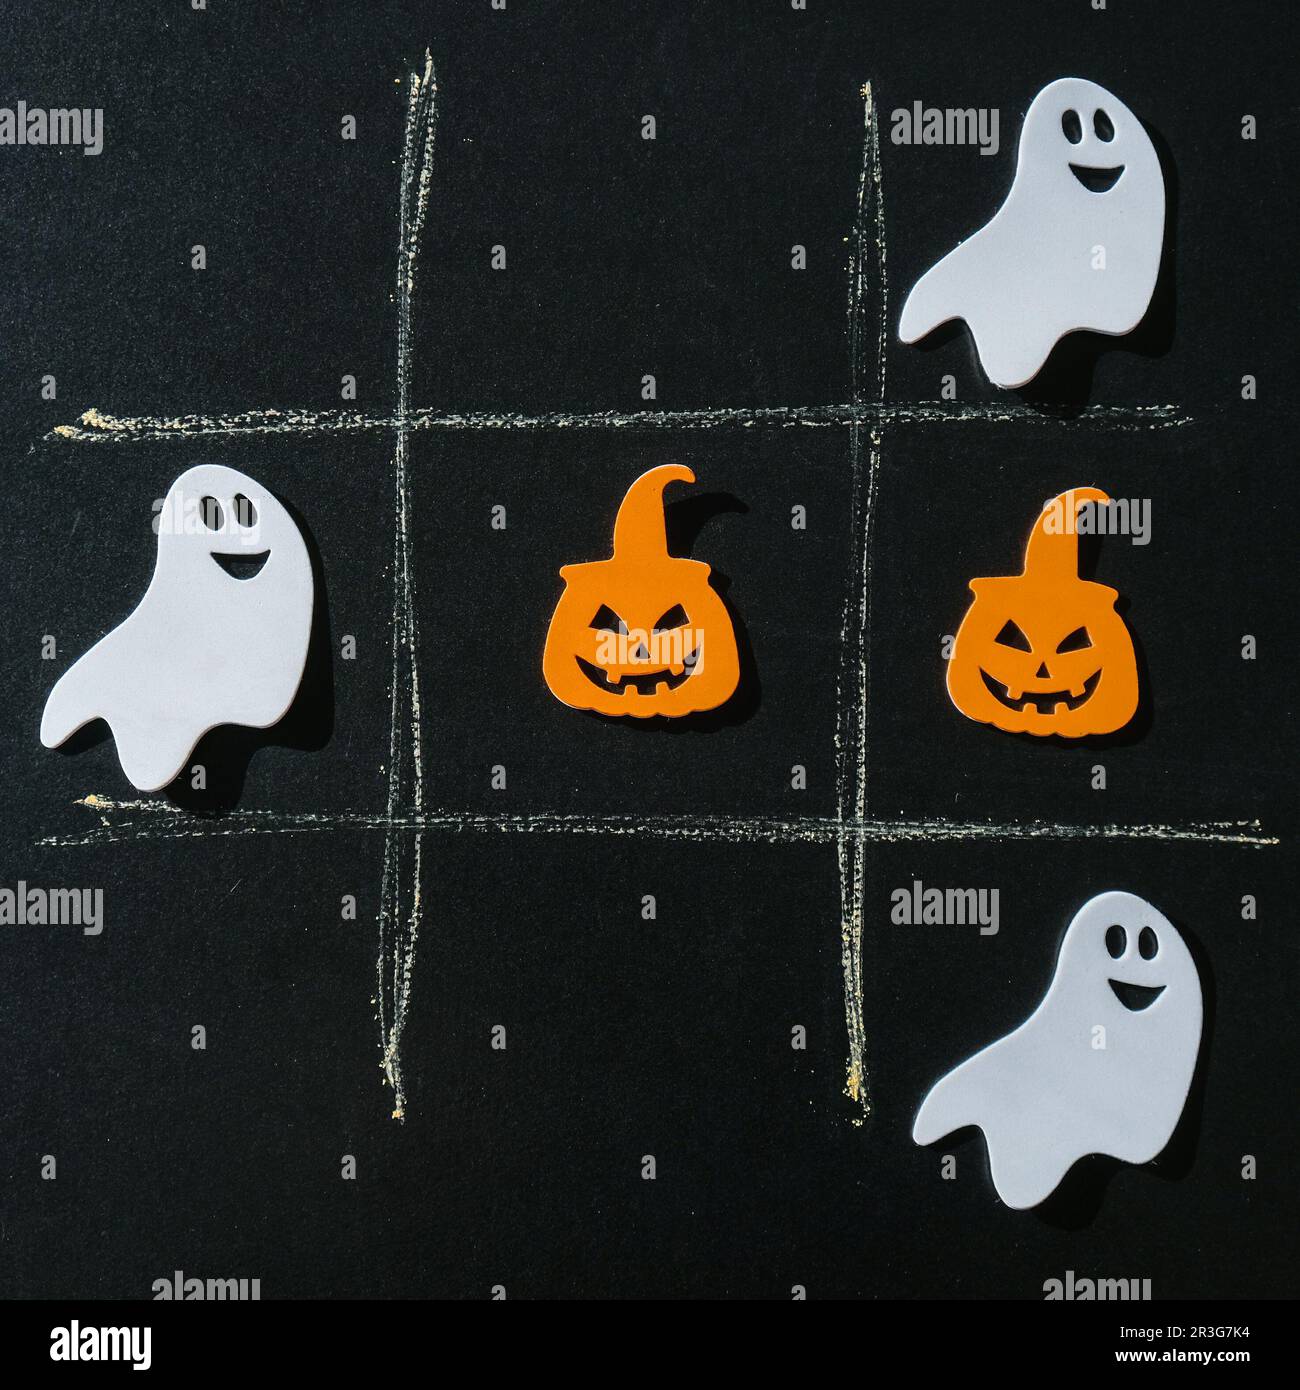 Creative tic tac toe game made of halloween decorations. Ghost bat pumpkin Autumn party concept Stock Photo